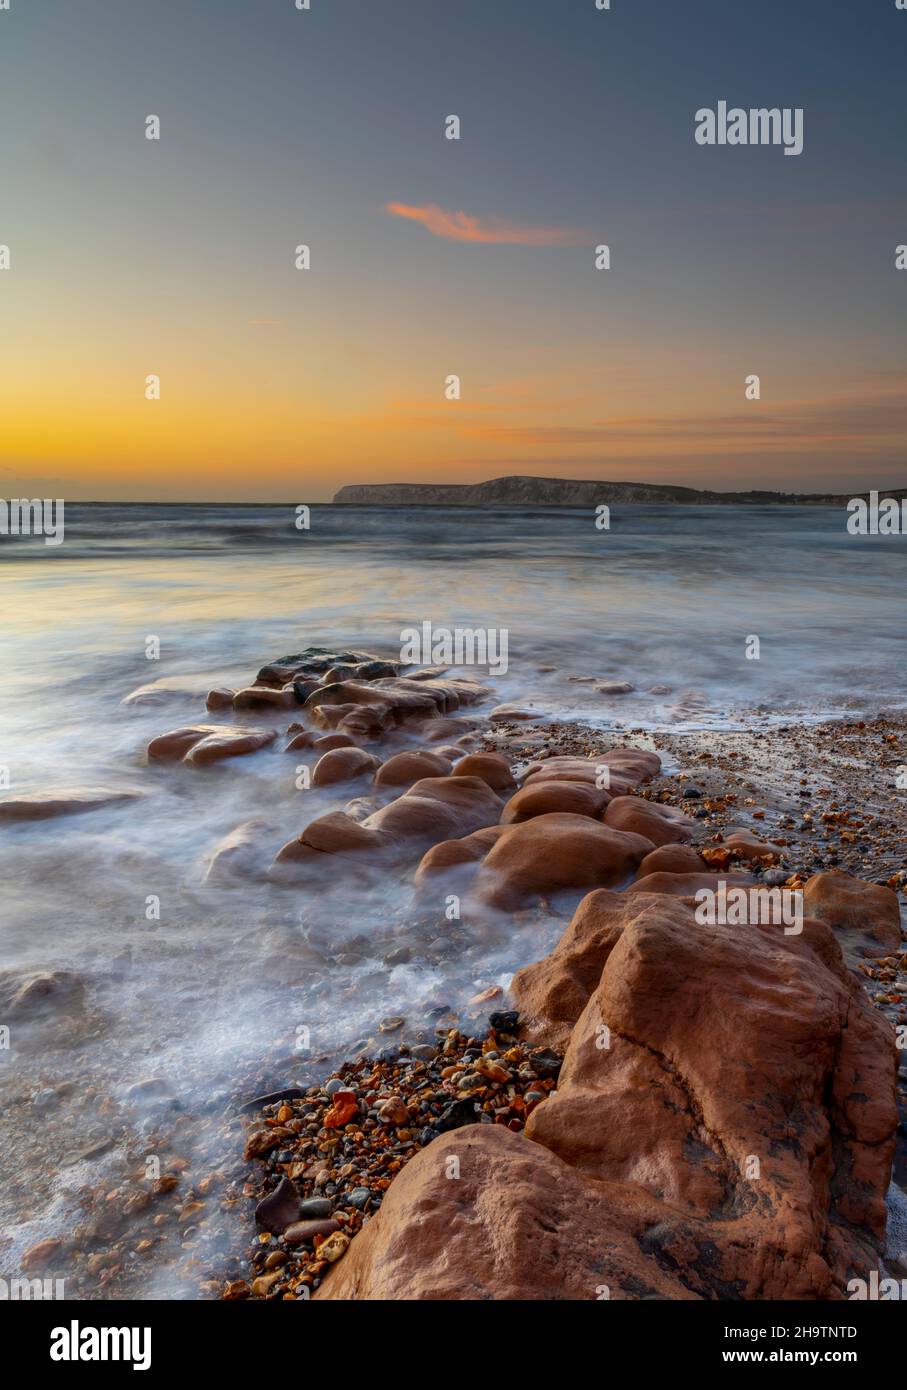 sunset over the sea and rocks at compton bay on the coastline of the isle of wight, shoreline of the isle of wight at compton bay at sun down, moody. Stock Photo